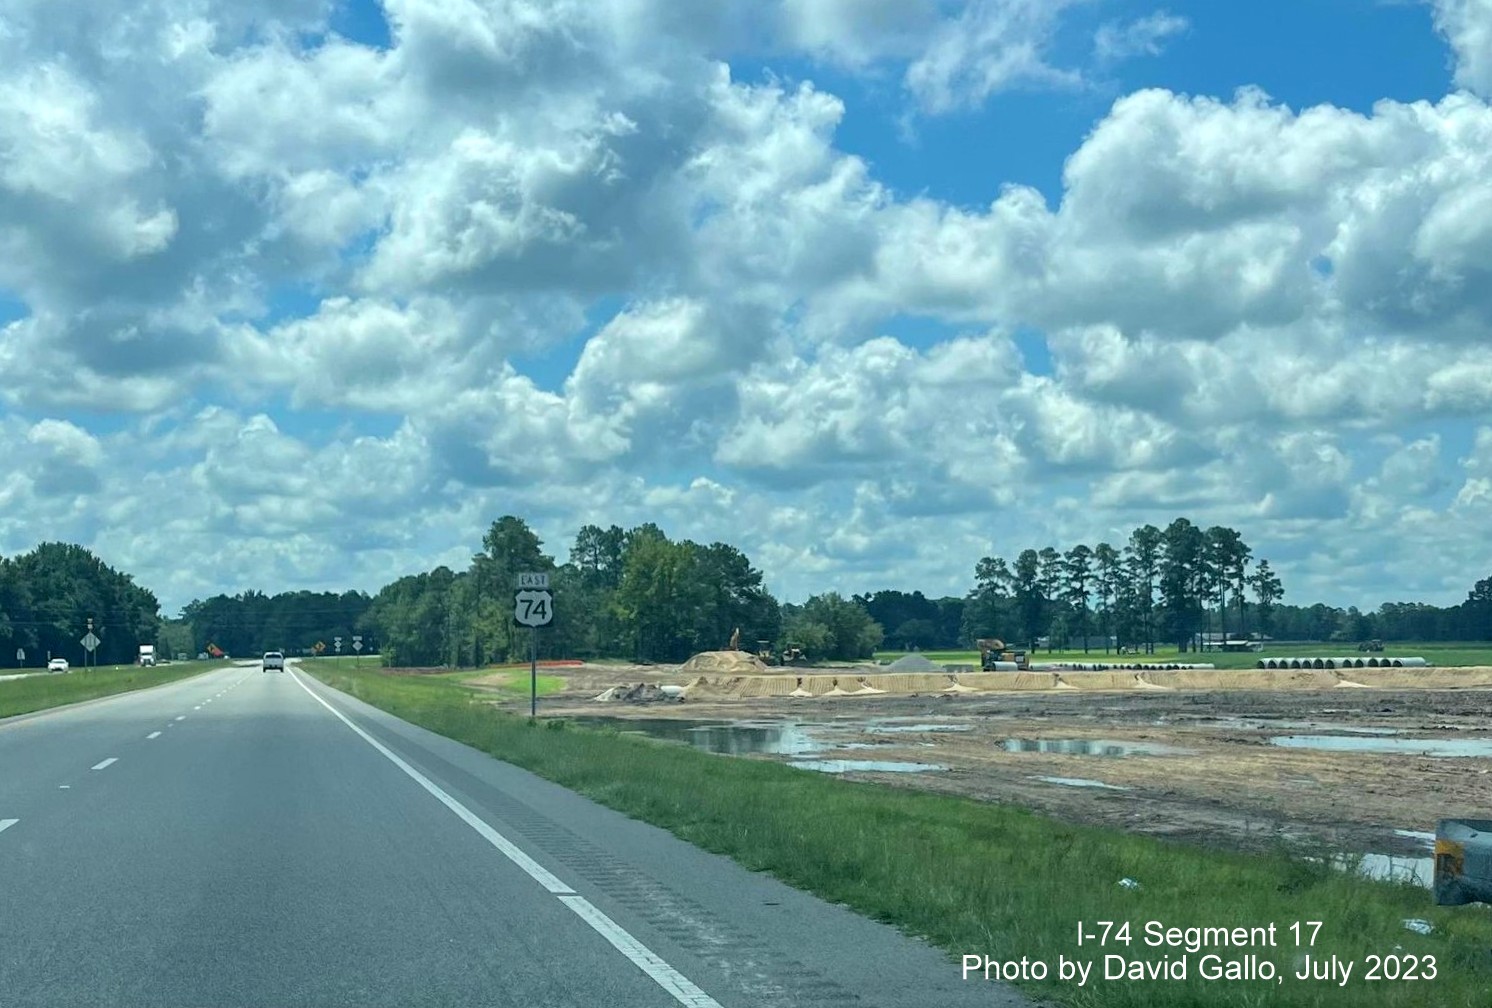 Image of land clearing along US 74 East lanes prior to NC 130 intersection for new interchange work, David Gallo, 
        July 2023